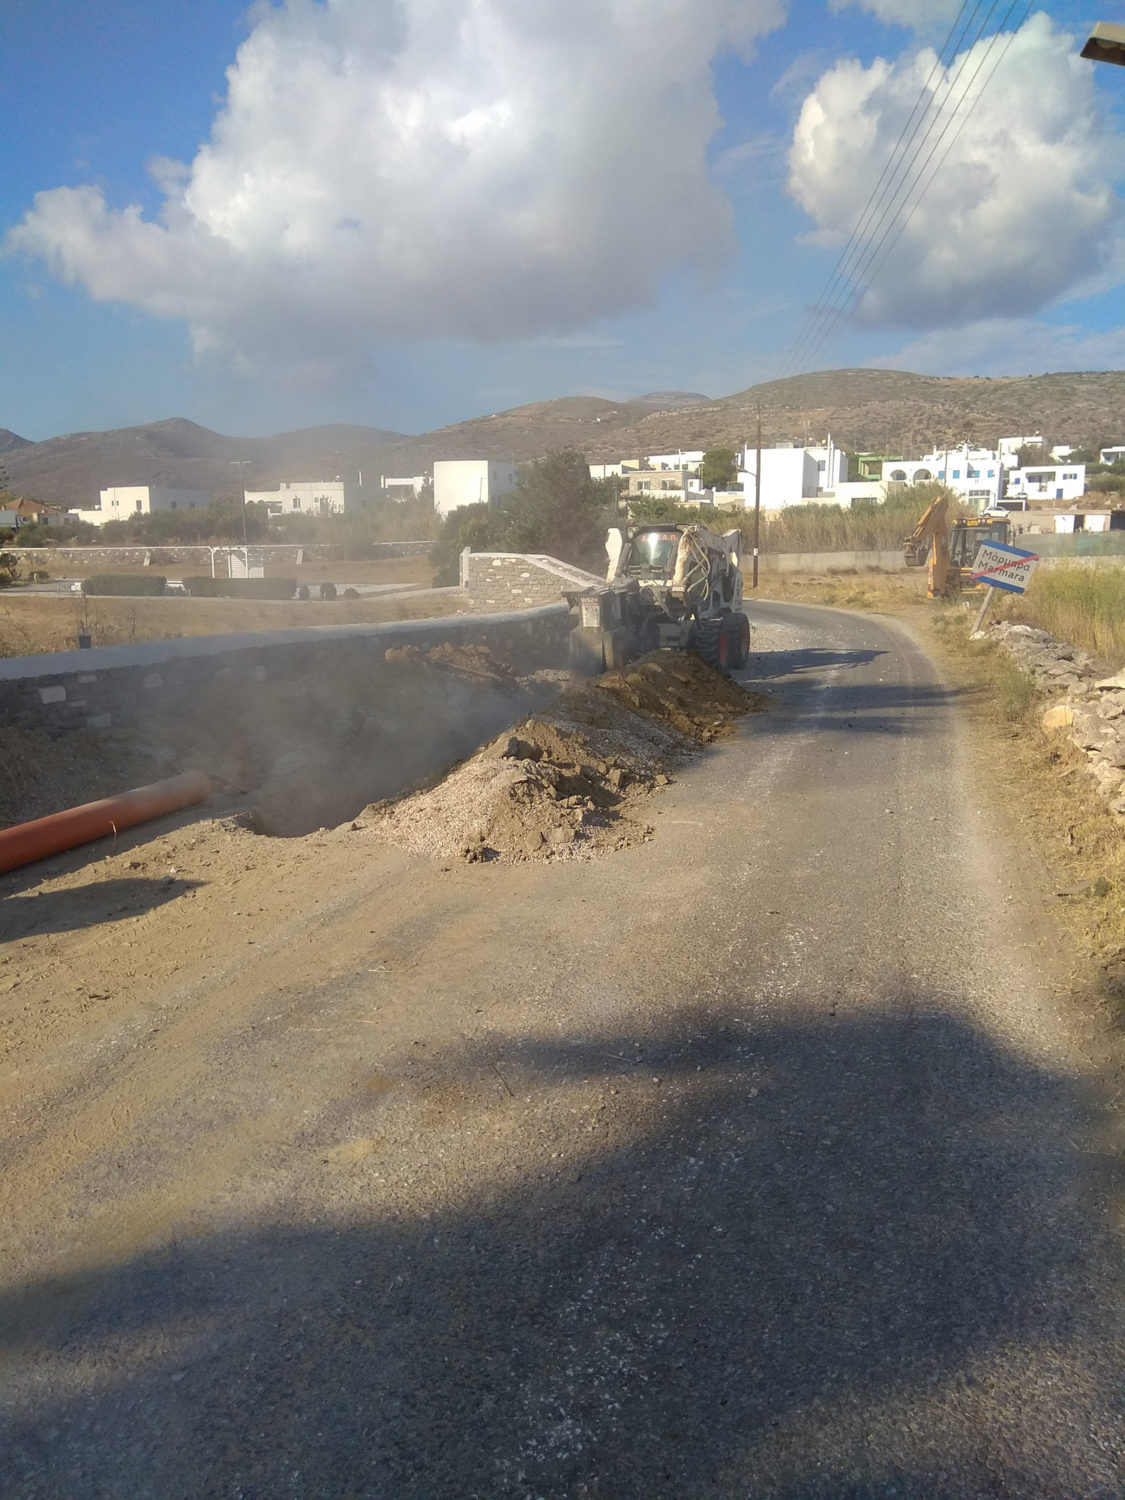 Sewerage works 2017 Network Expansion in the community of Archilochos (Marmara)